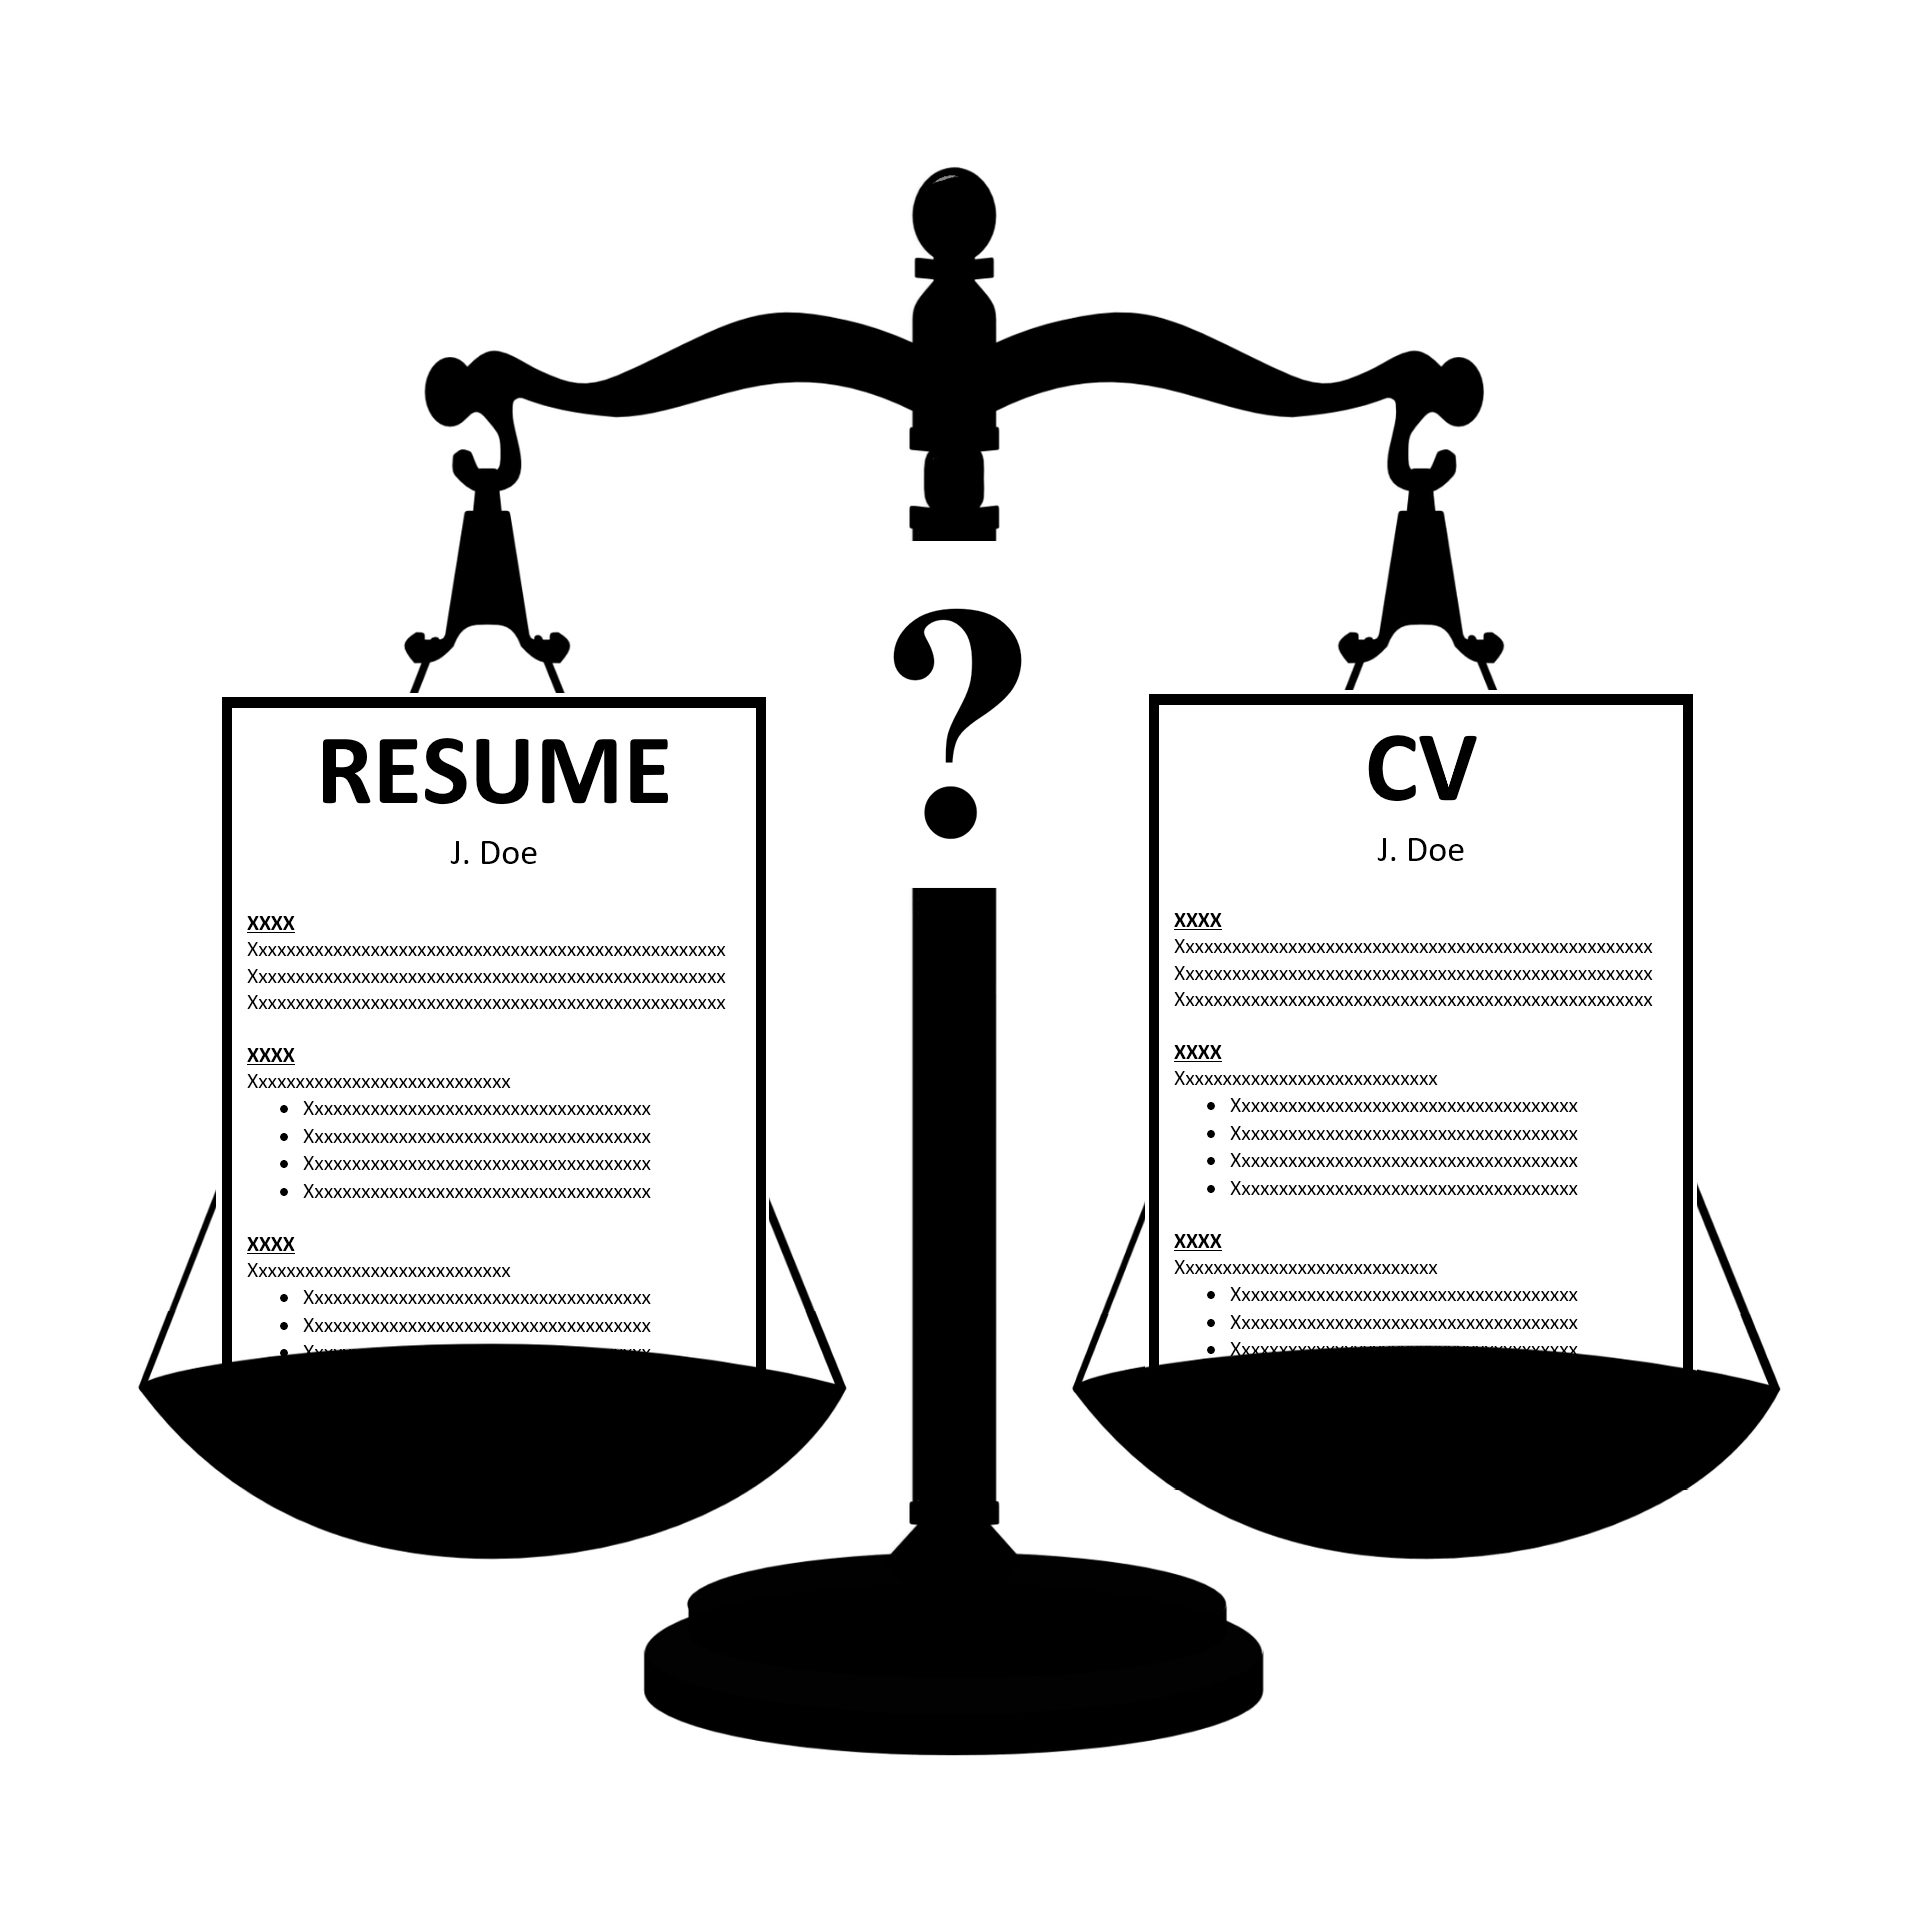 Balance scale with resume and CV, with a question mark in center.